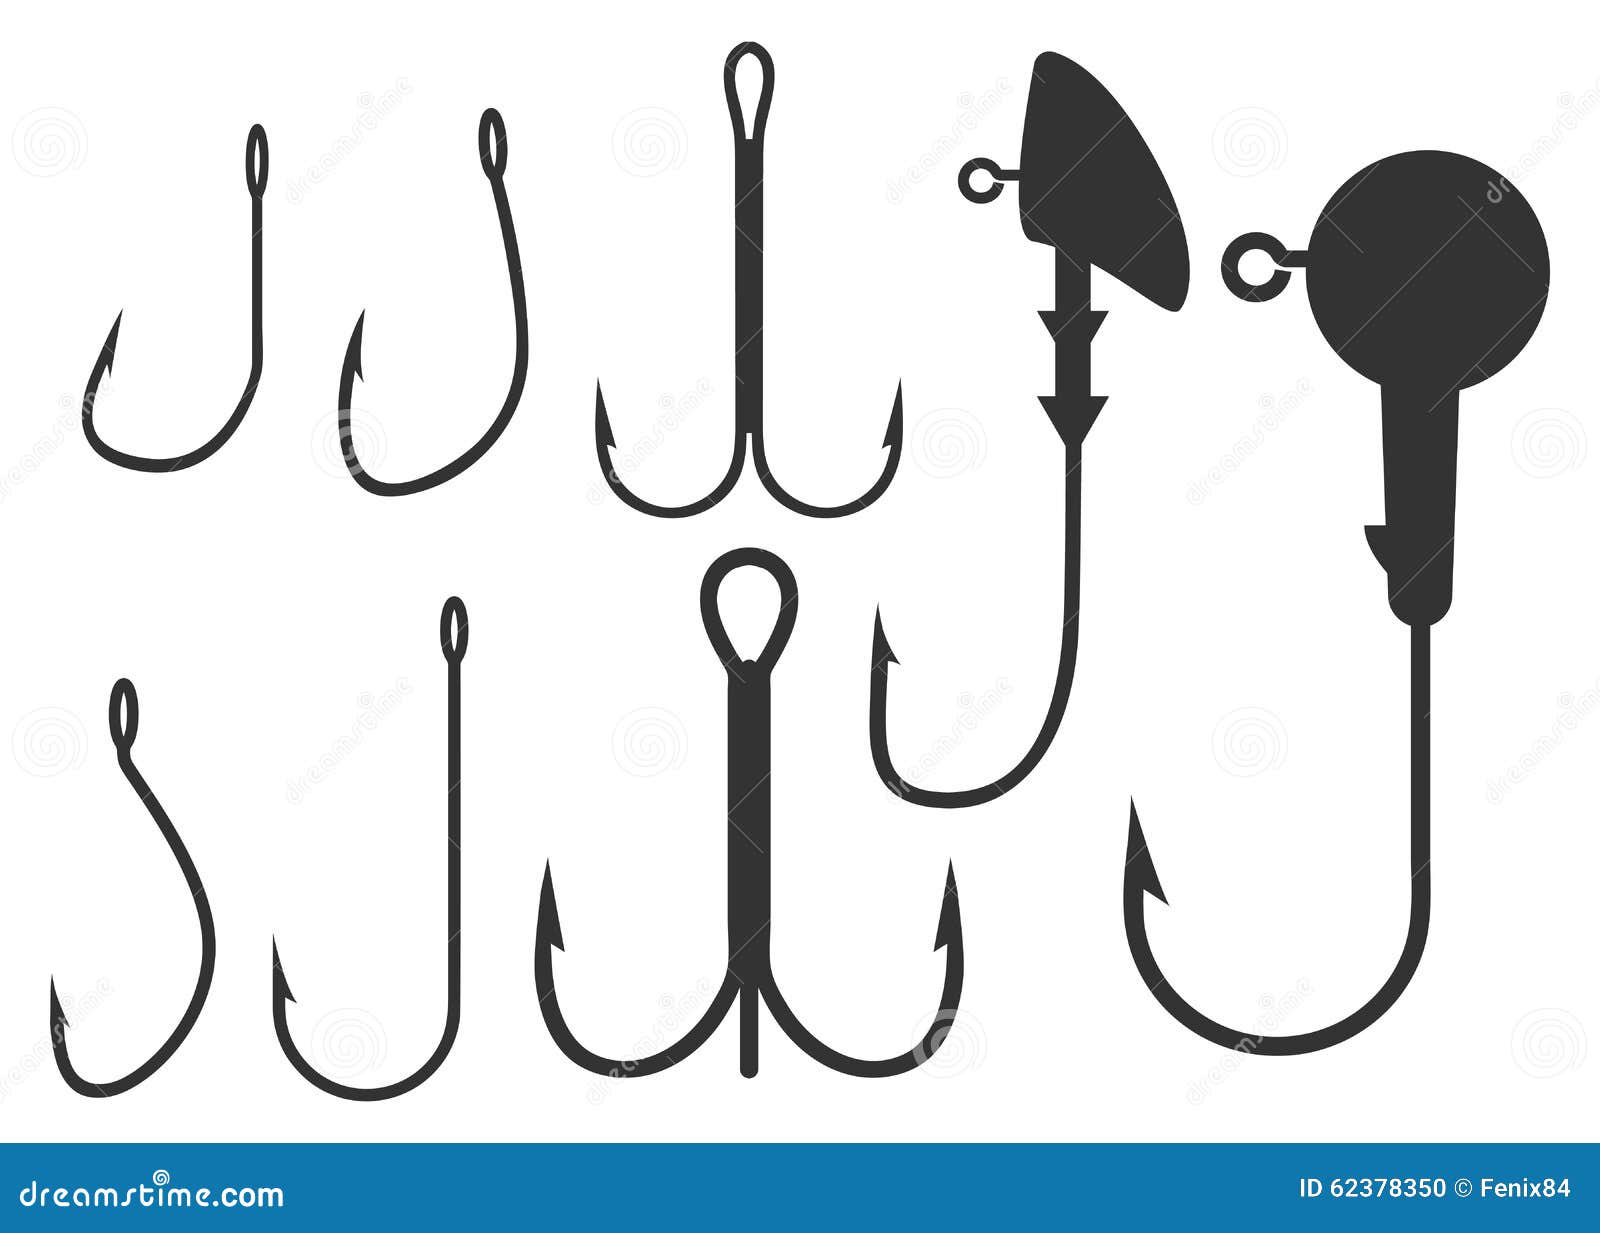 https://thumbs.dreamstime.com/z/fishing-hooks-jig-heads-set-vector-illustrations-white-background-collection-equipment-rod-spinning-angling-62378350.jpg